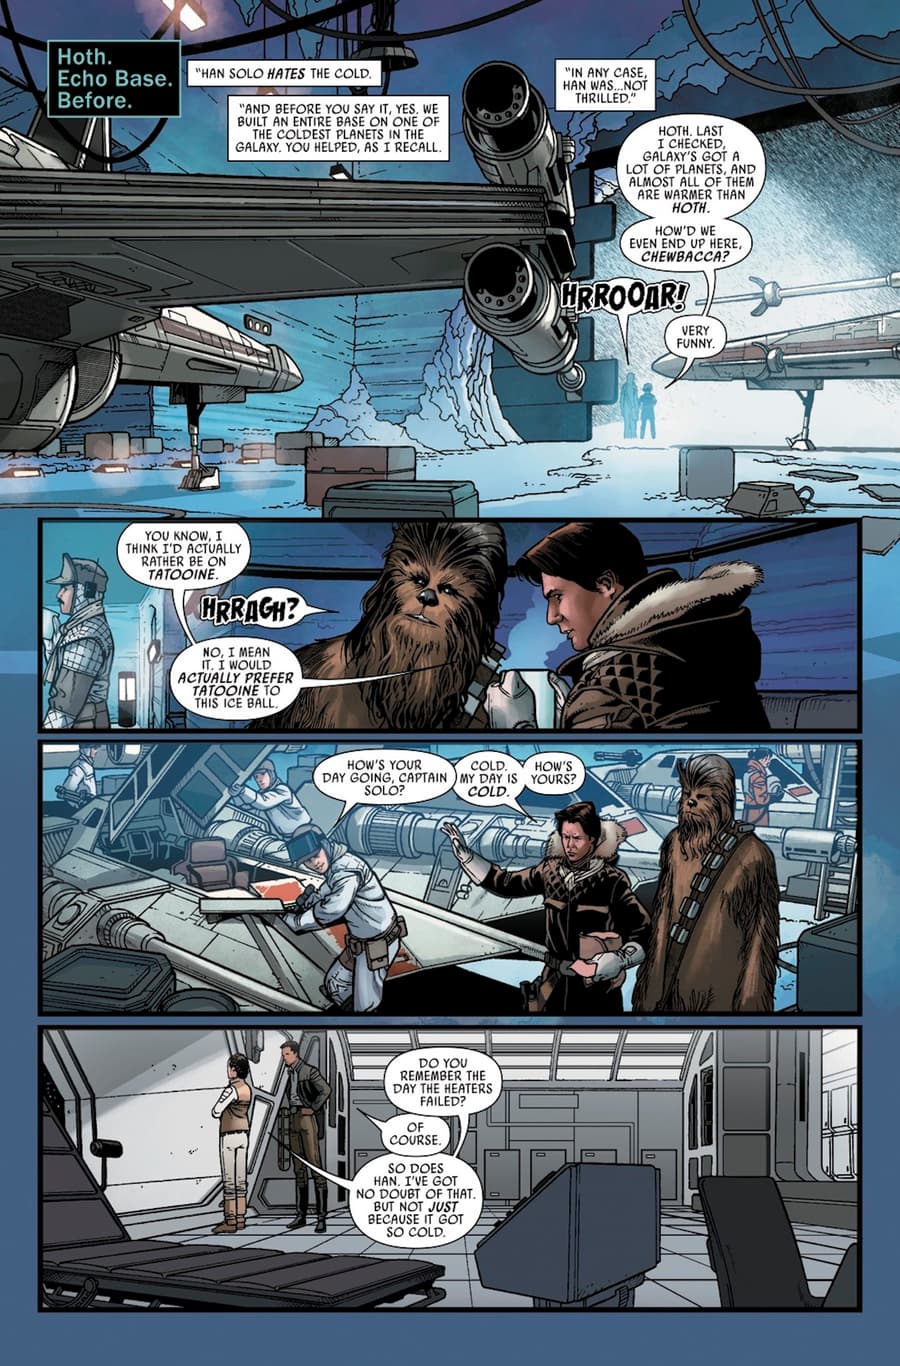 STAR WARS #12 interior art by Ramon Rosanas with colors by Rachelle Rosenberg and letters by VC's Clayton Cowles